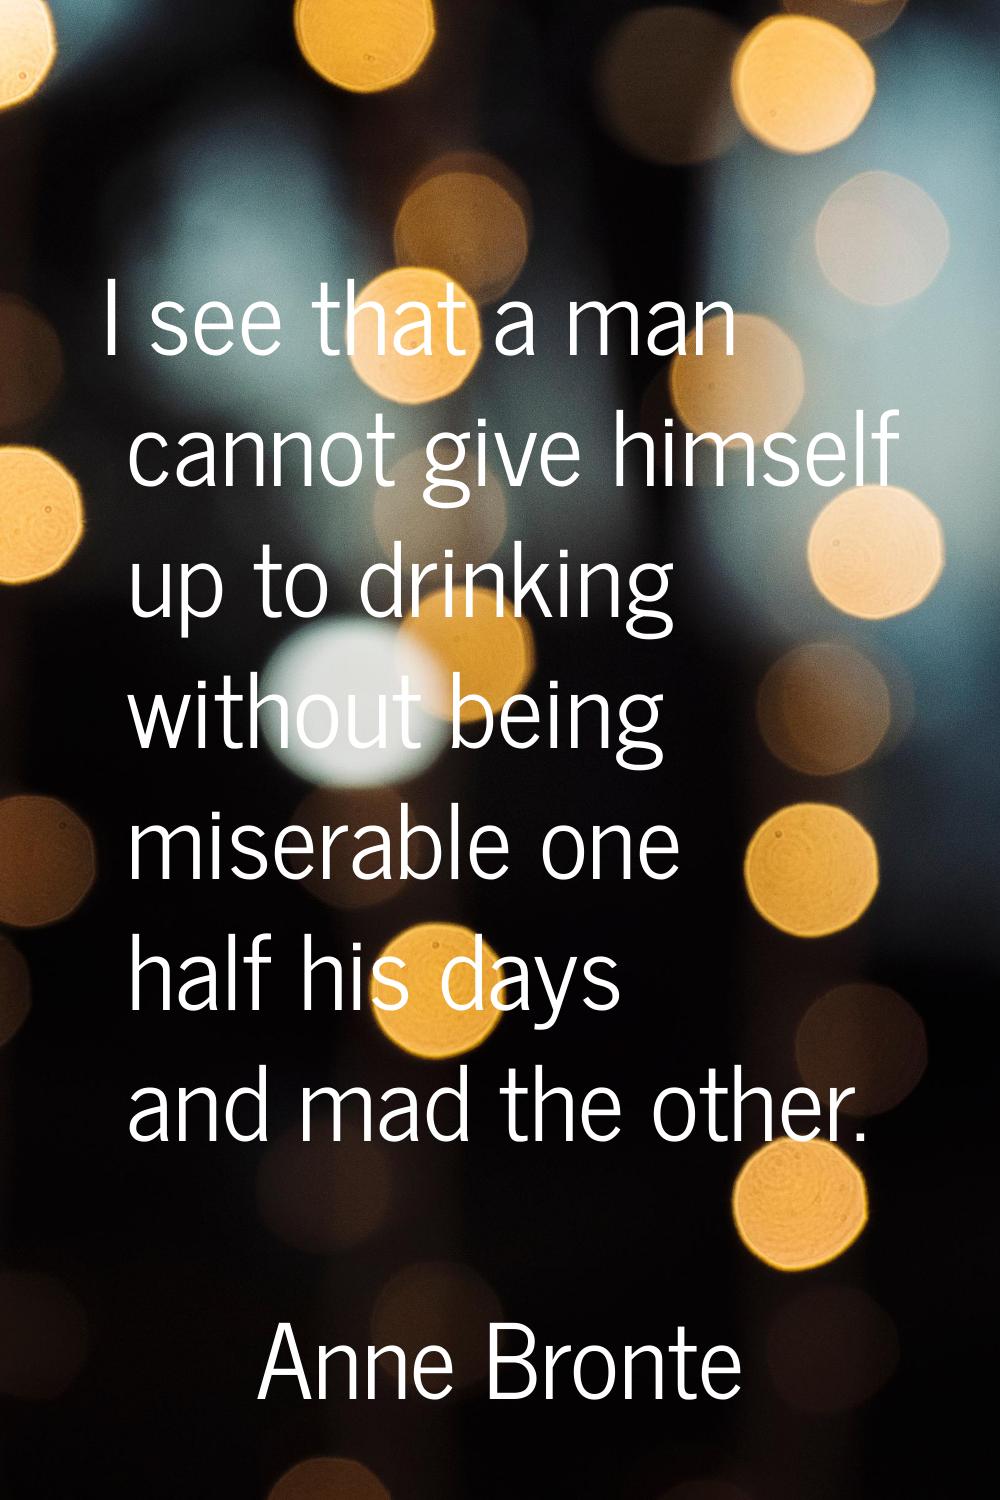 I see that a man cannot give himself up to drinking without being miserable one half his days and m